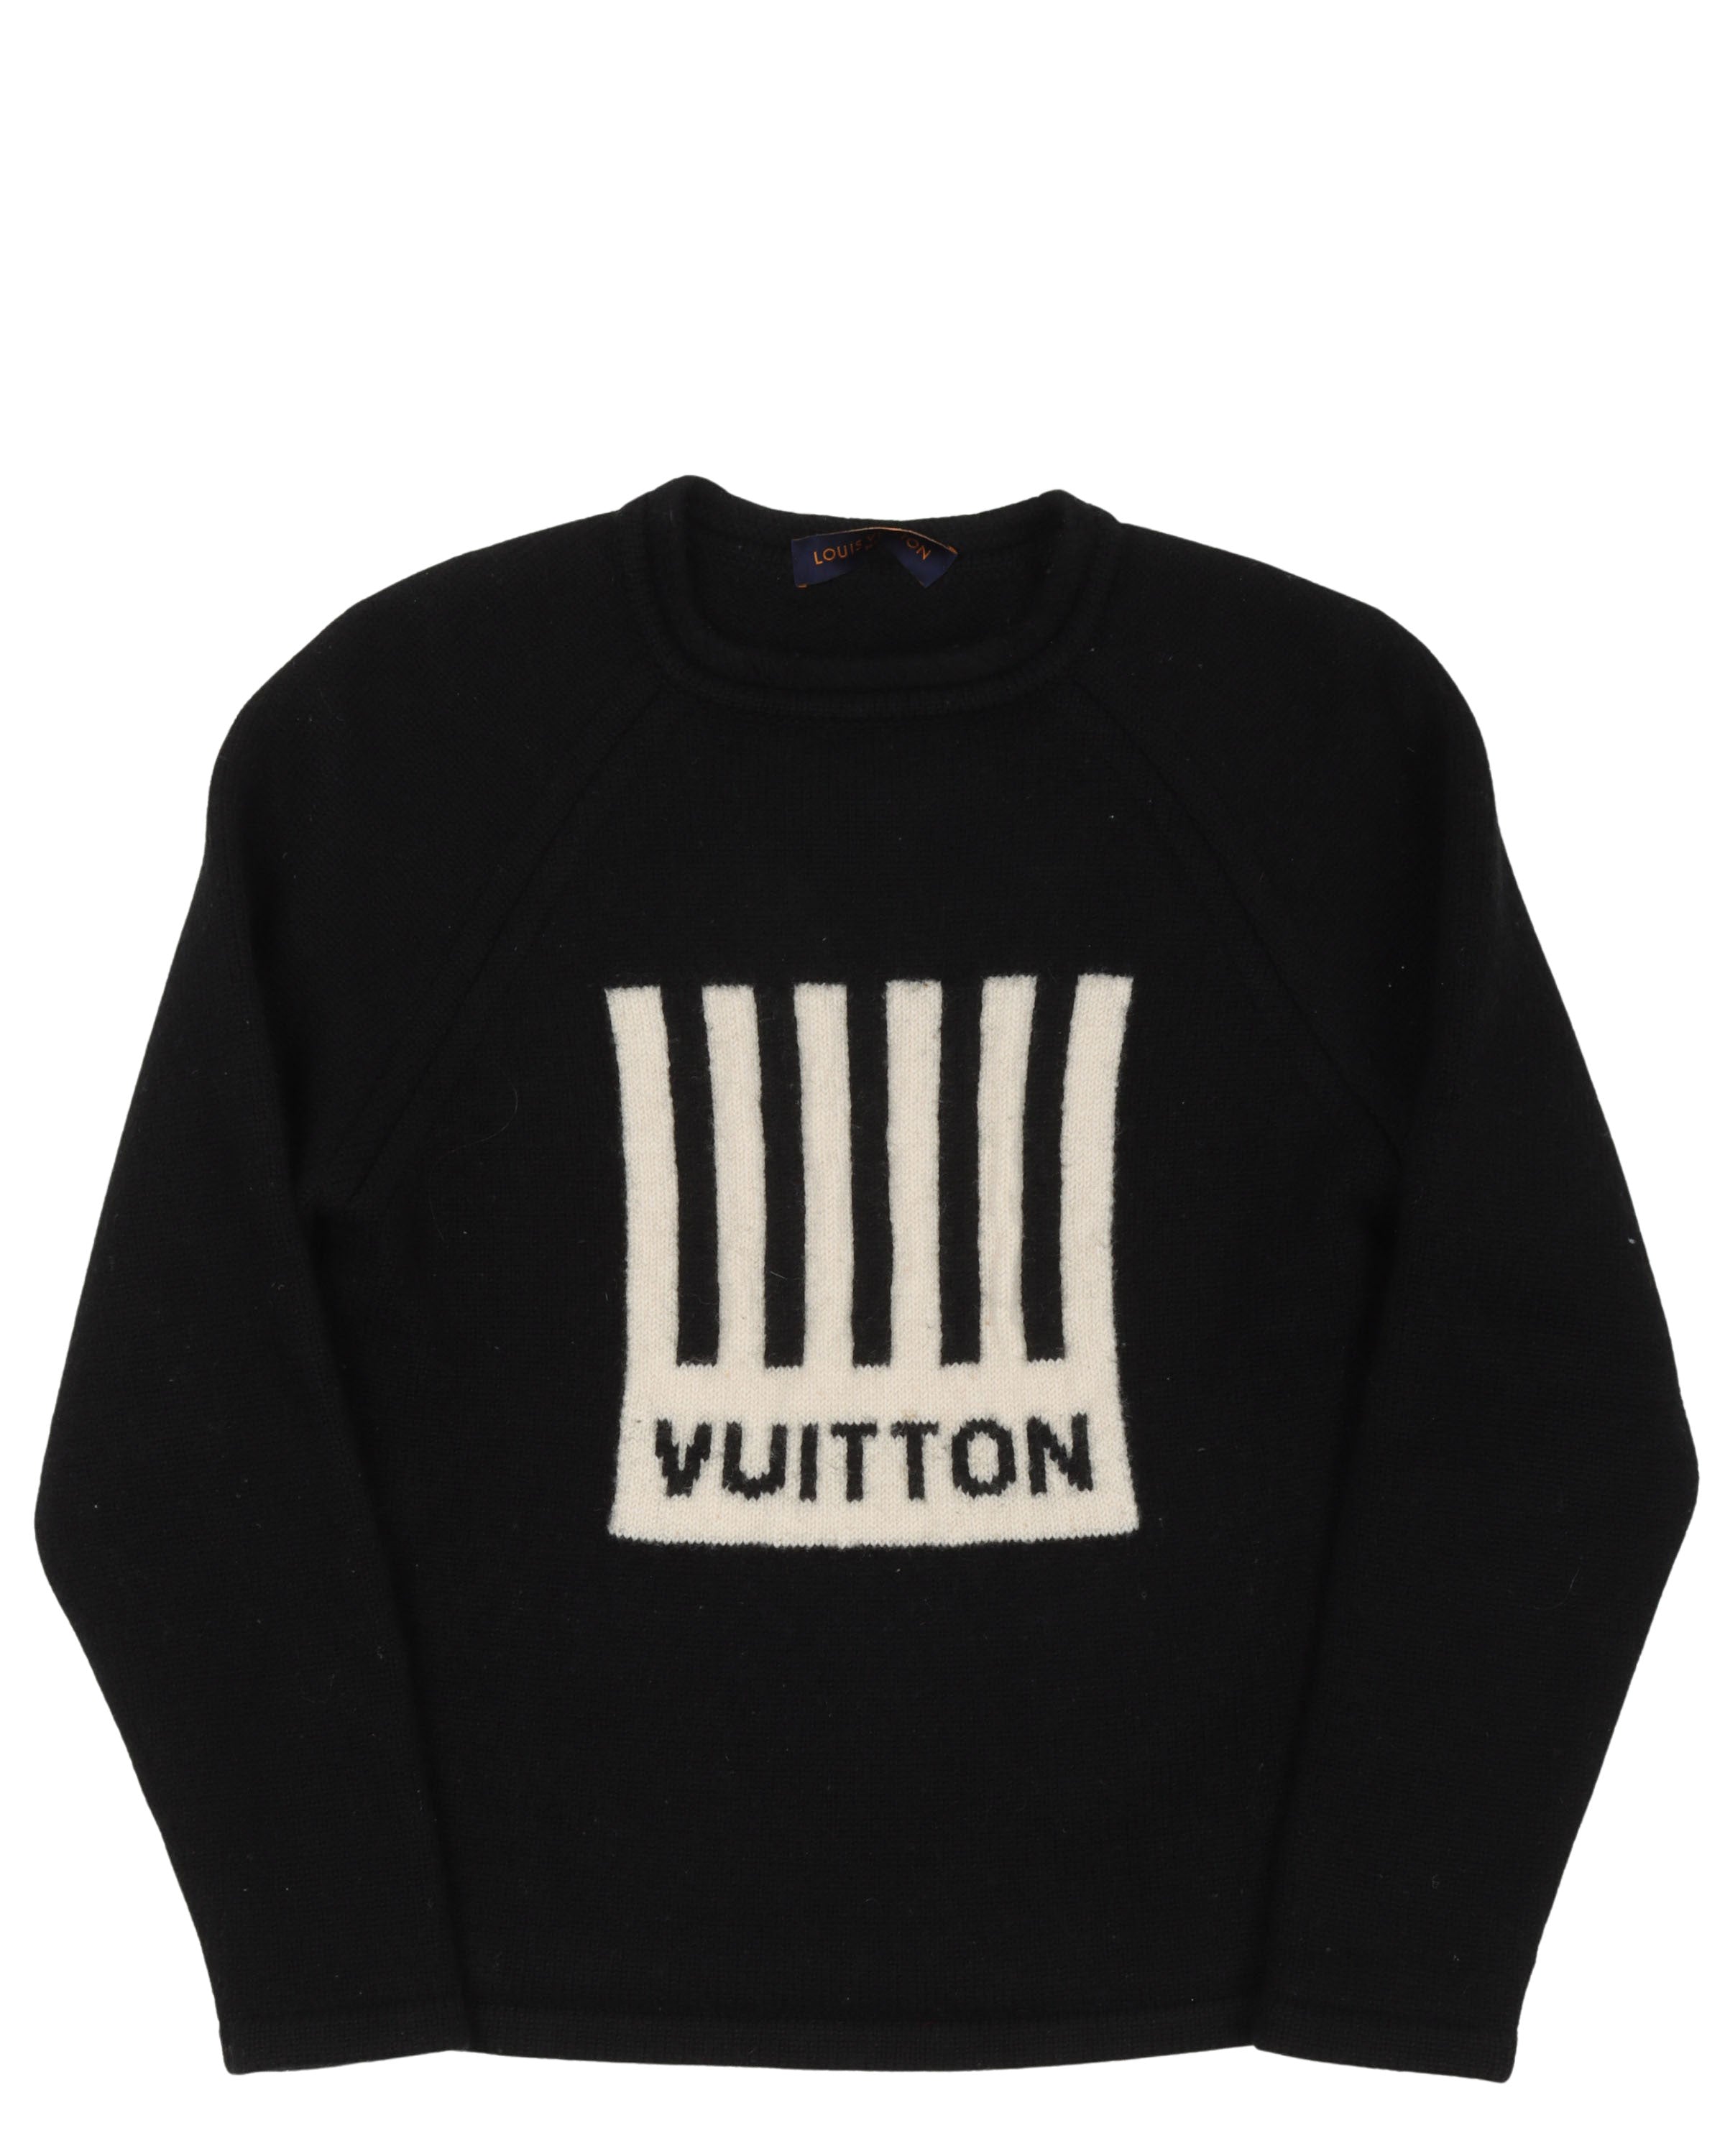 Louis Vuitton Blue Cotton and Wool Crew Neck Sweater - size S